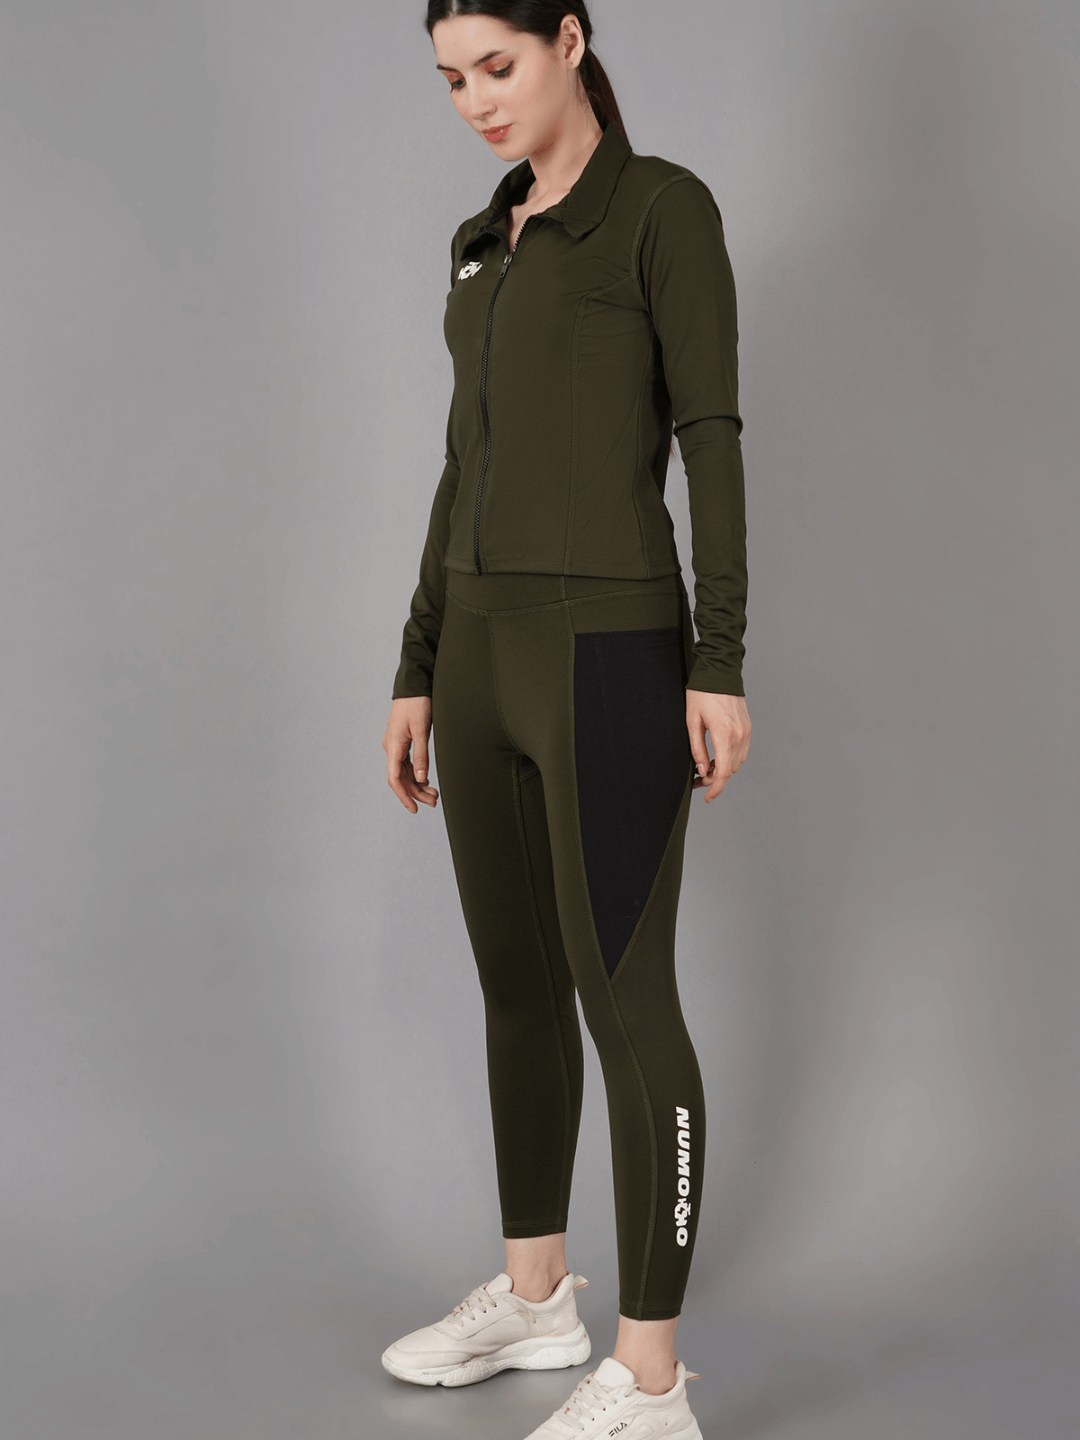 Womens Activewear Jackets in Womens Activewear